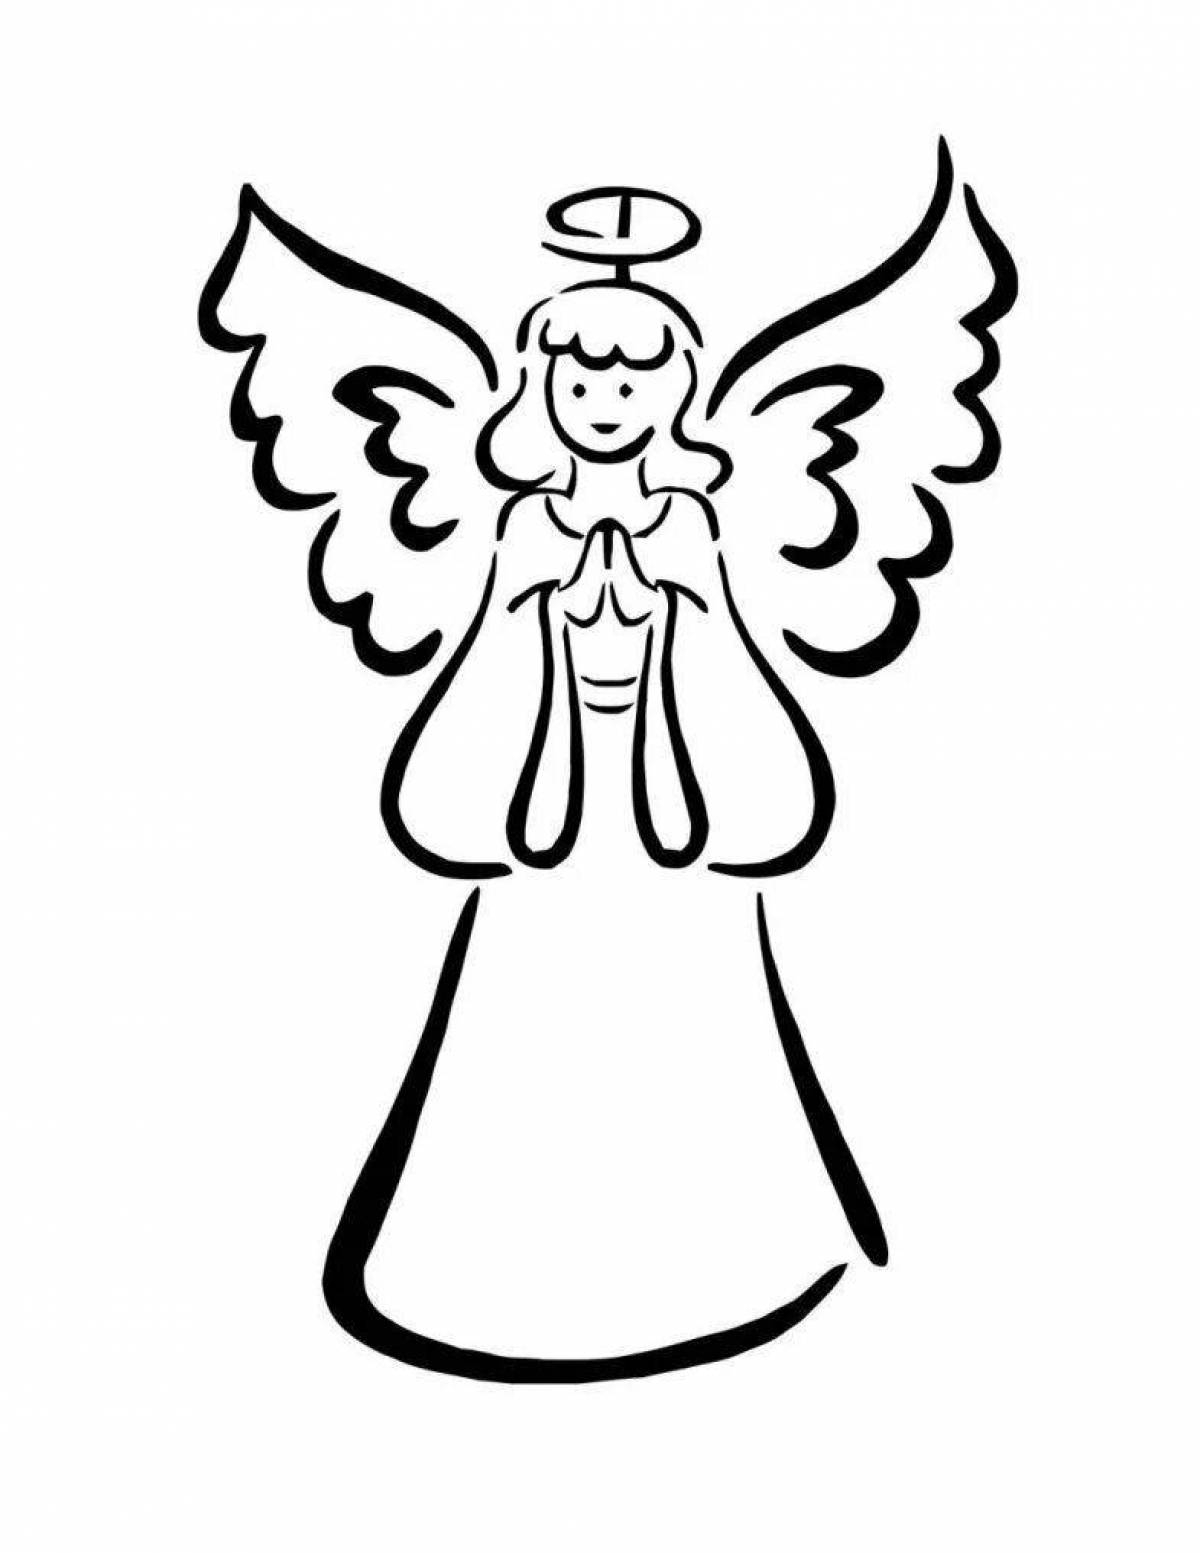 Shining angel coloring book for kids